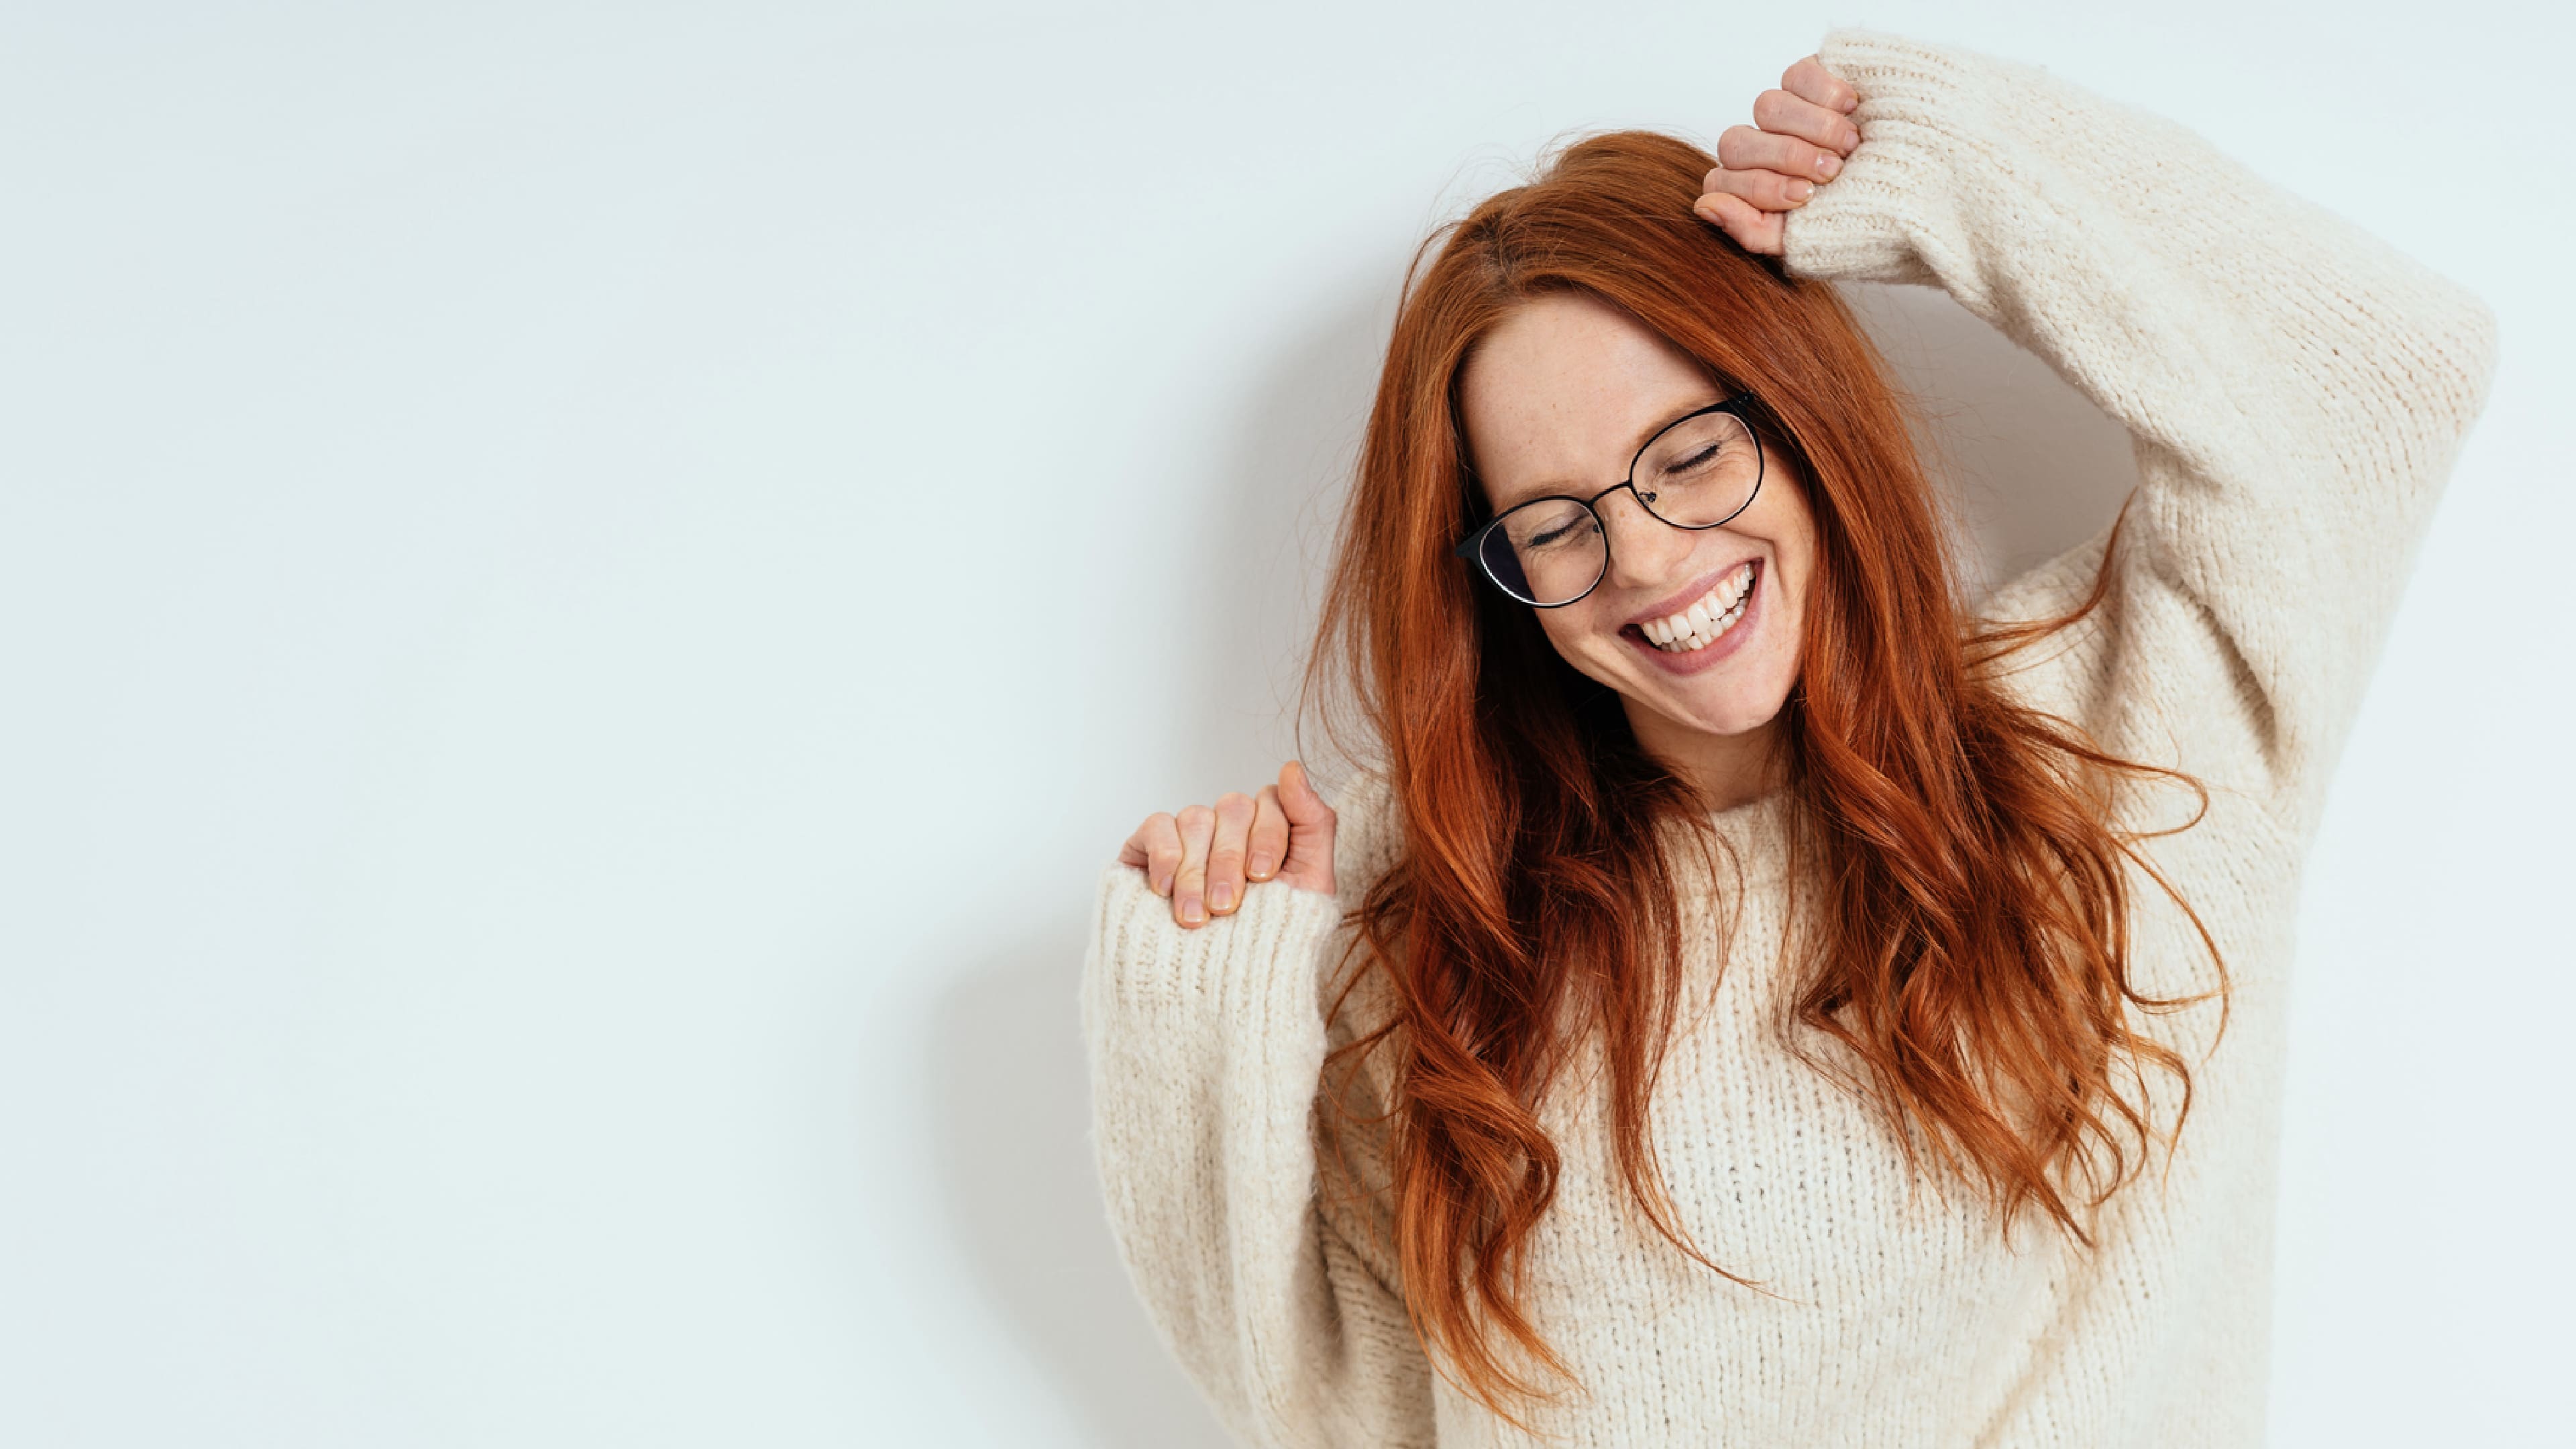 woman with glasses smiling brightly with her hands up